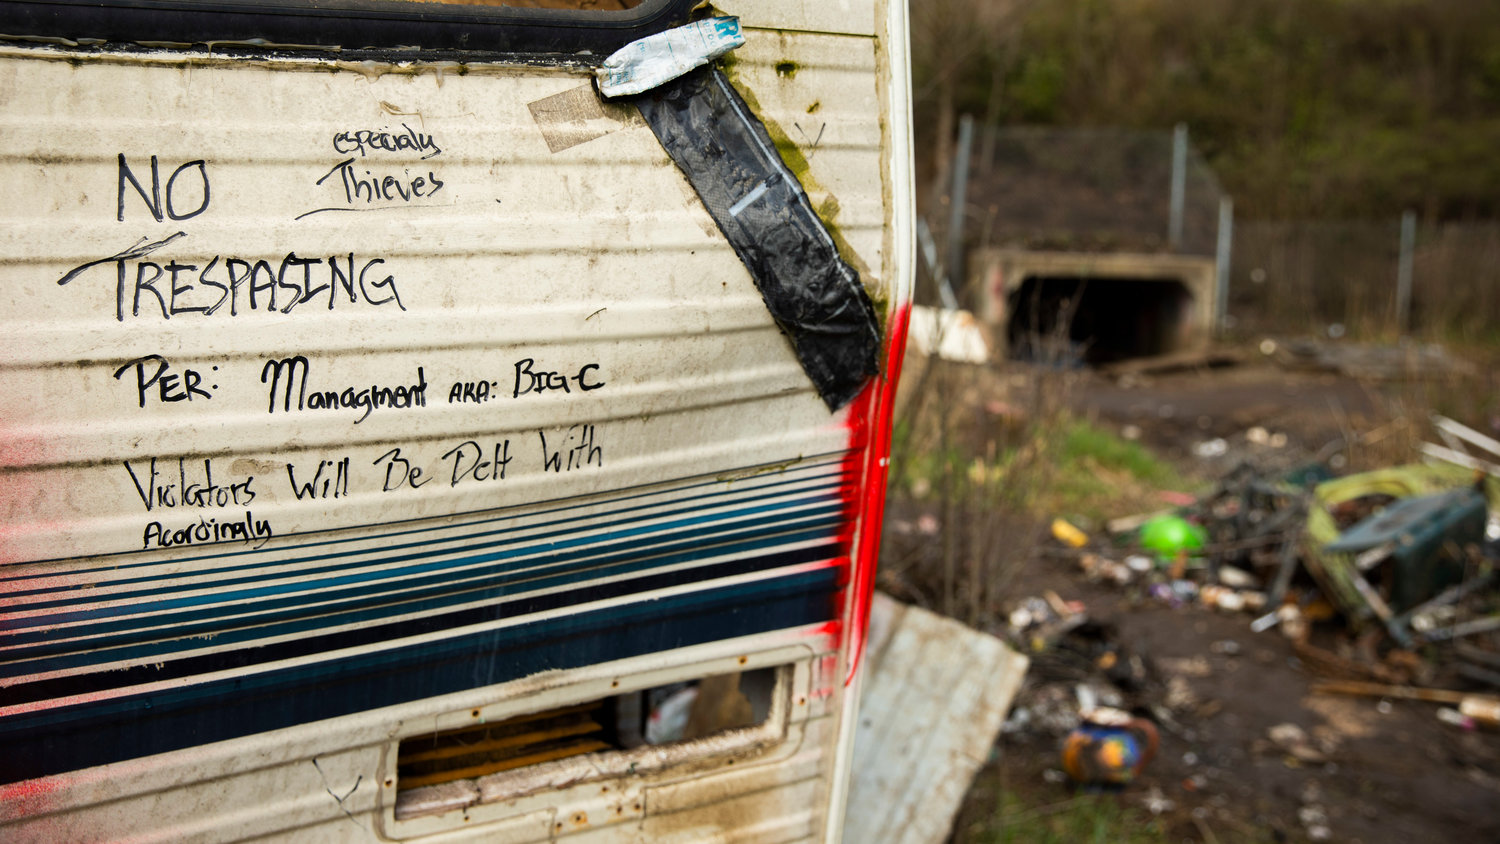 A message is seen written on a trailer at a homeless encampment near Blakeslee Junction on Wednesday, March 29, 2023.